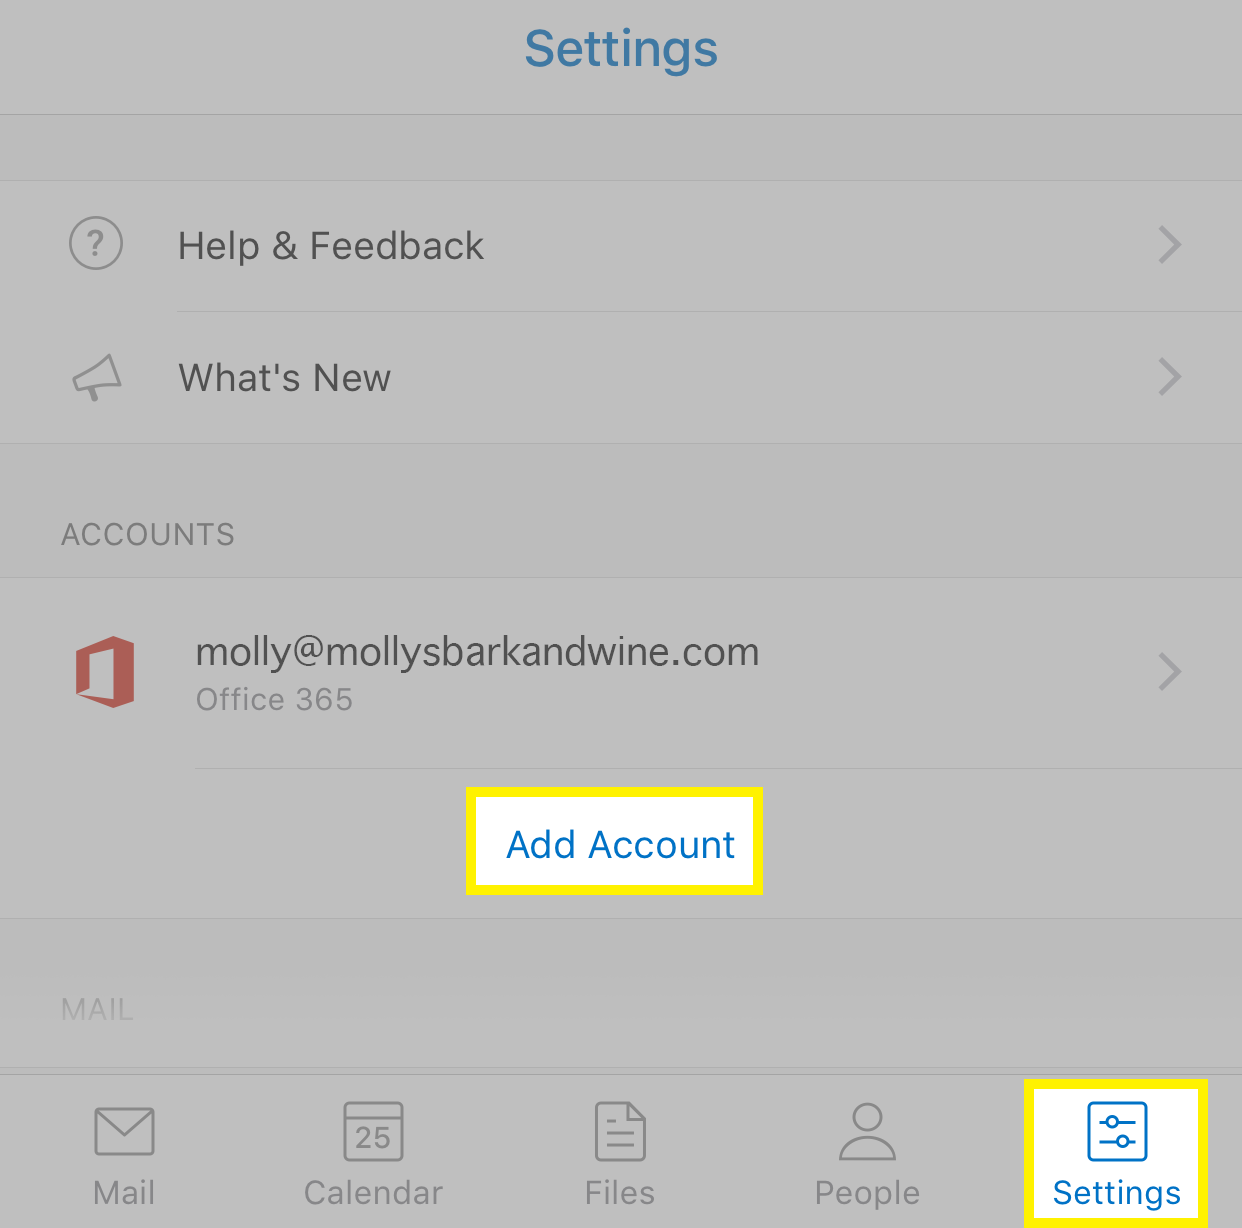 Already set up account, tap Settings, tap Add Account